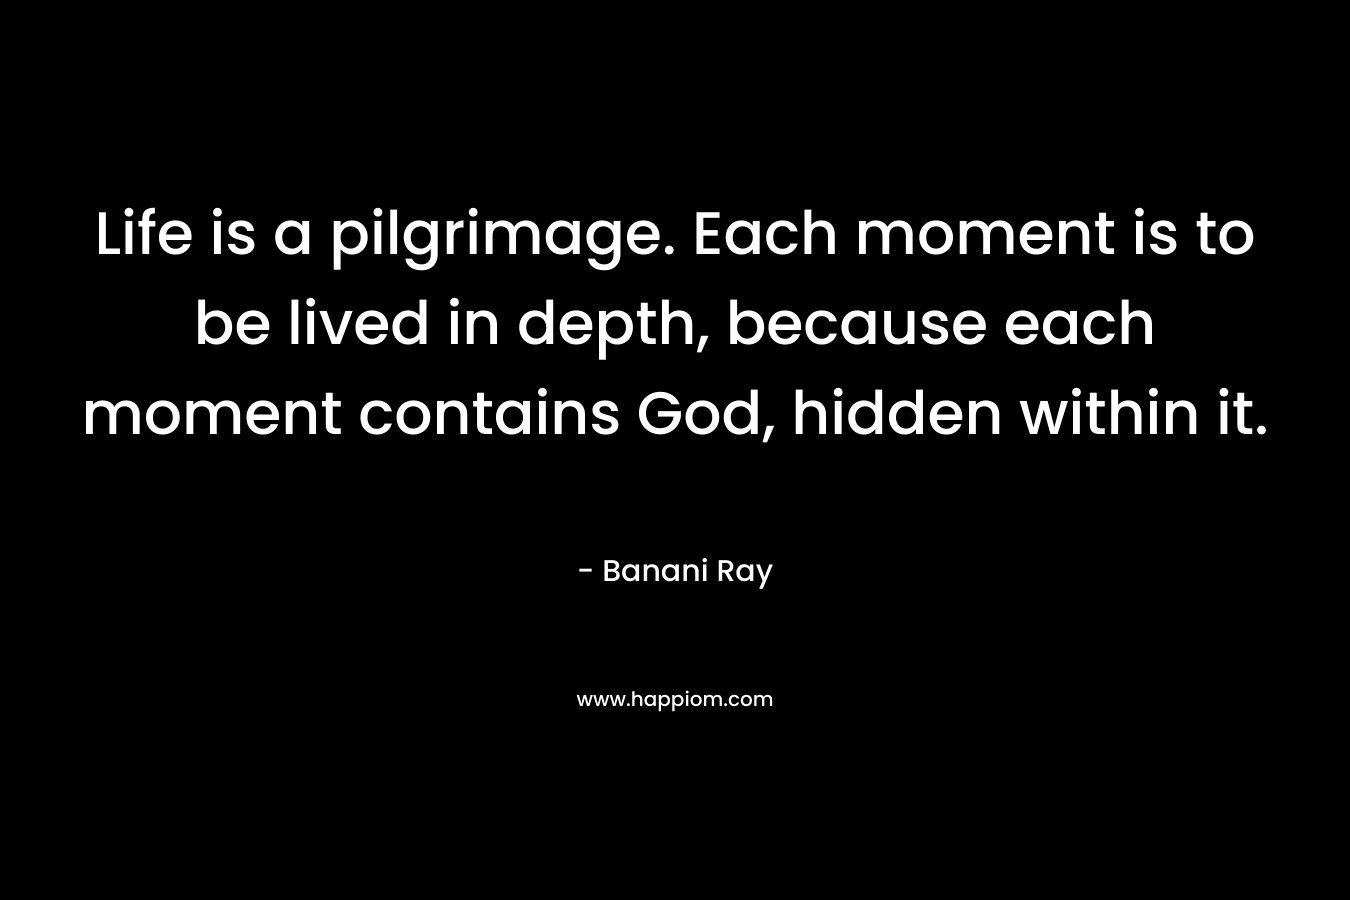 Life is a pilgrimage. Each moment is to be lived in depth, because each moment contains God, hidden within it.